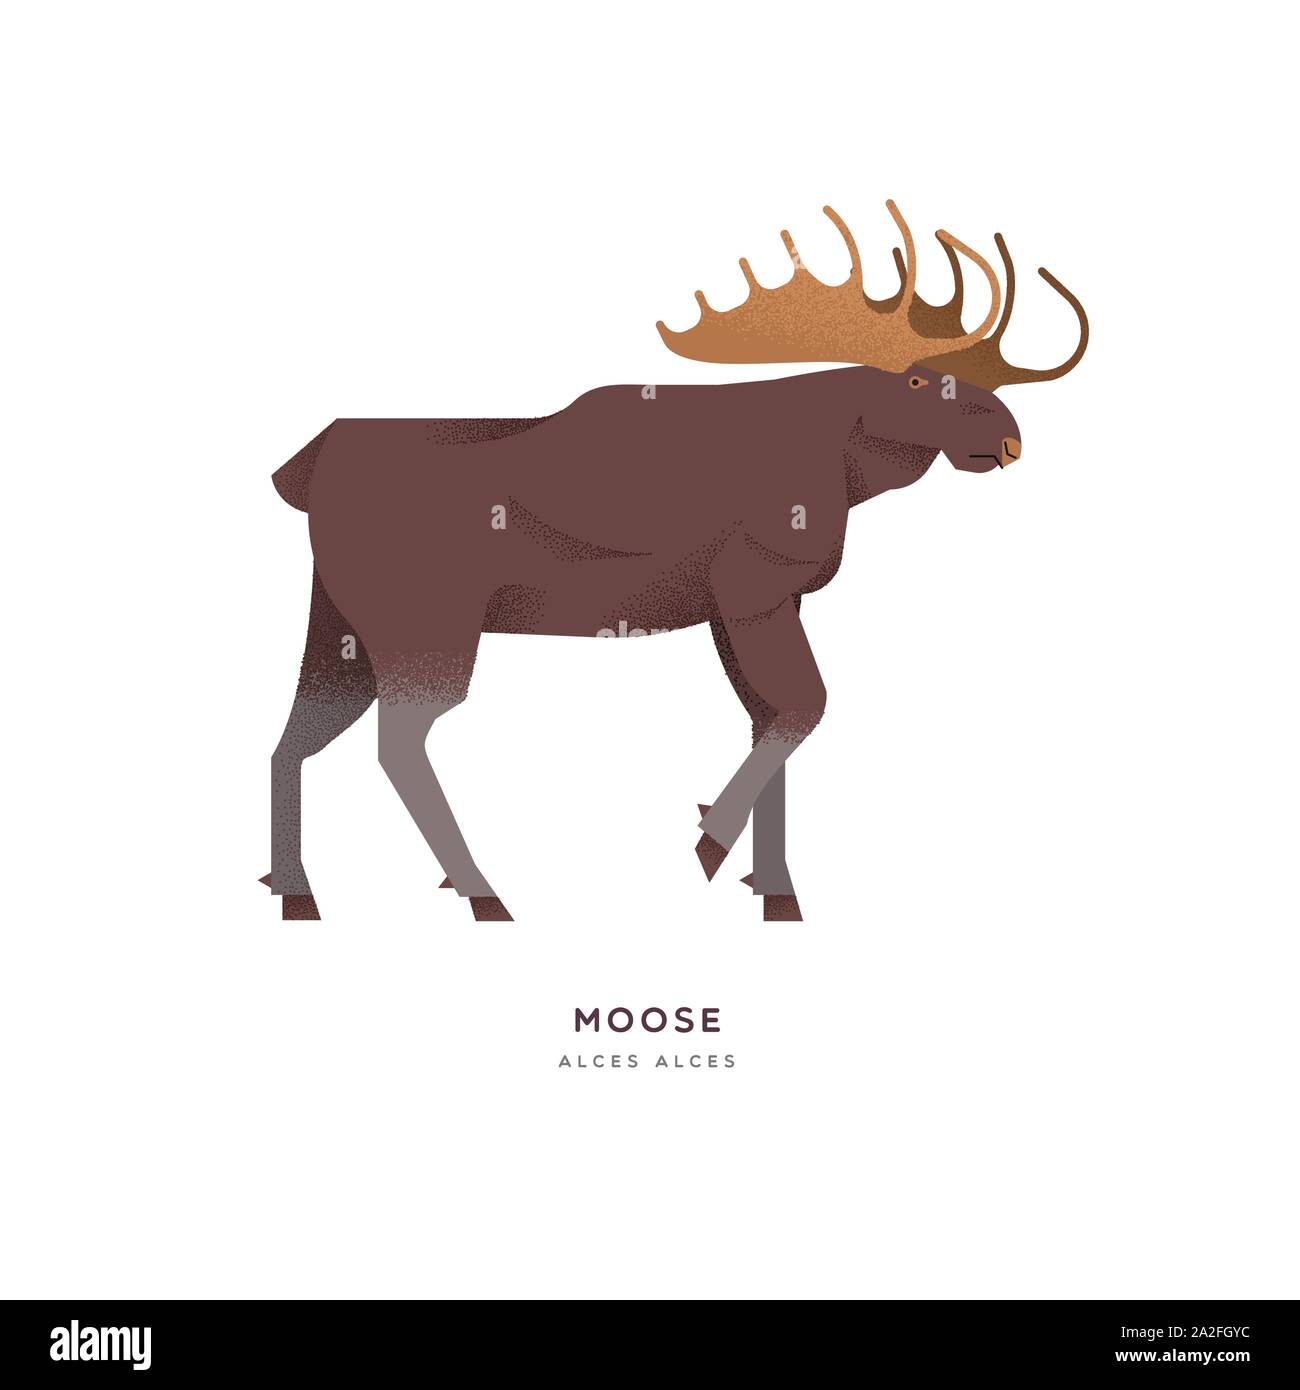 Wild moose animal illustration of big antler elk on isolated white background. Educational wildlife design with fauna species name label. Stock Vector